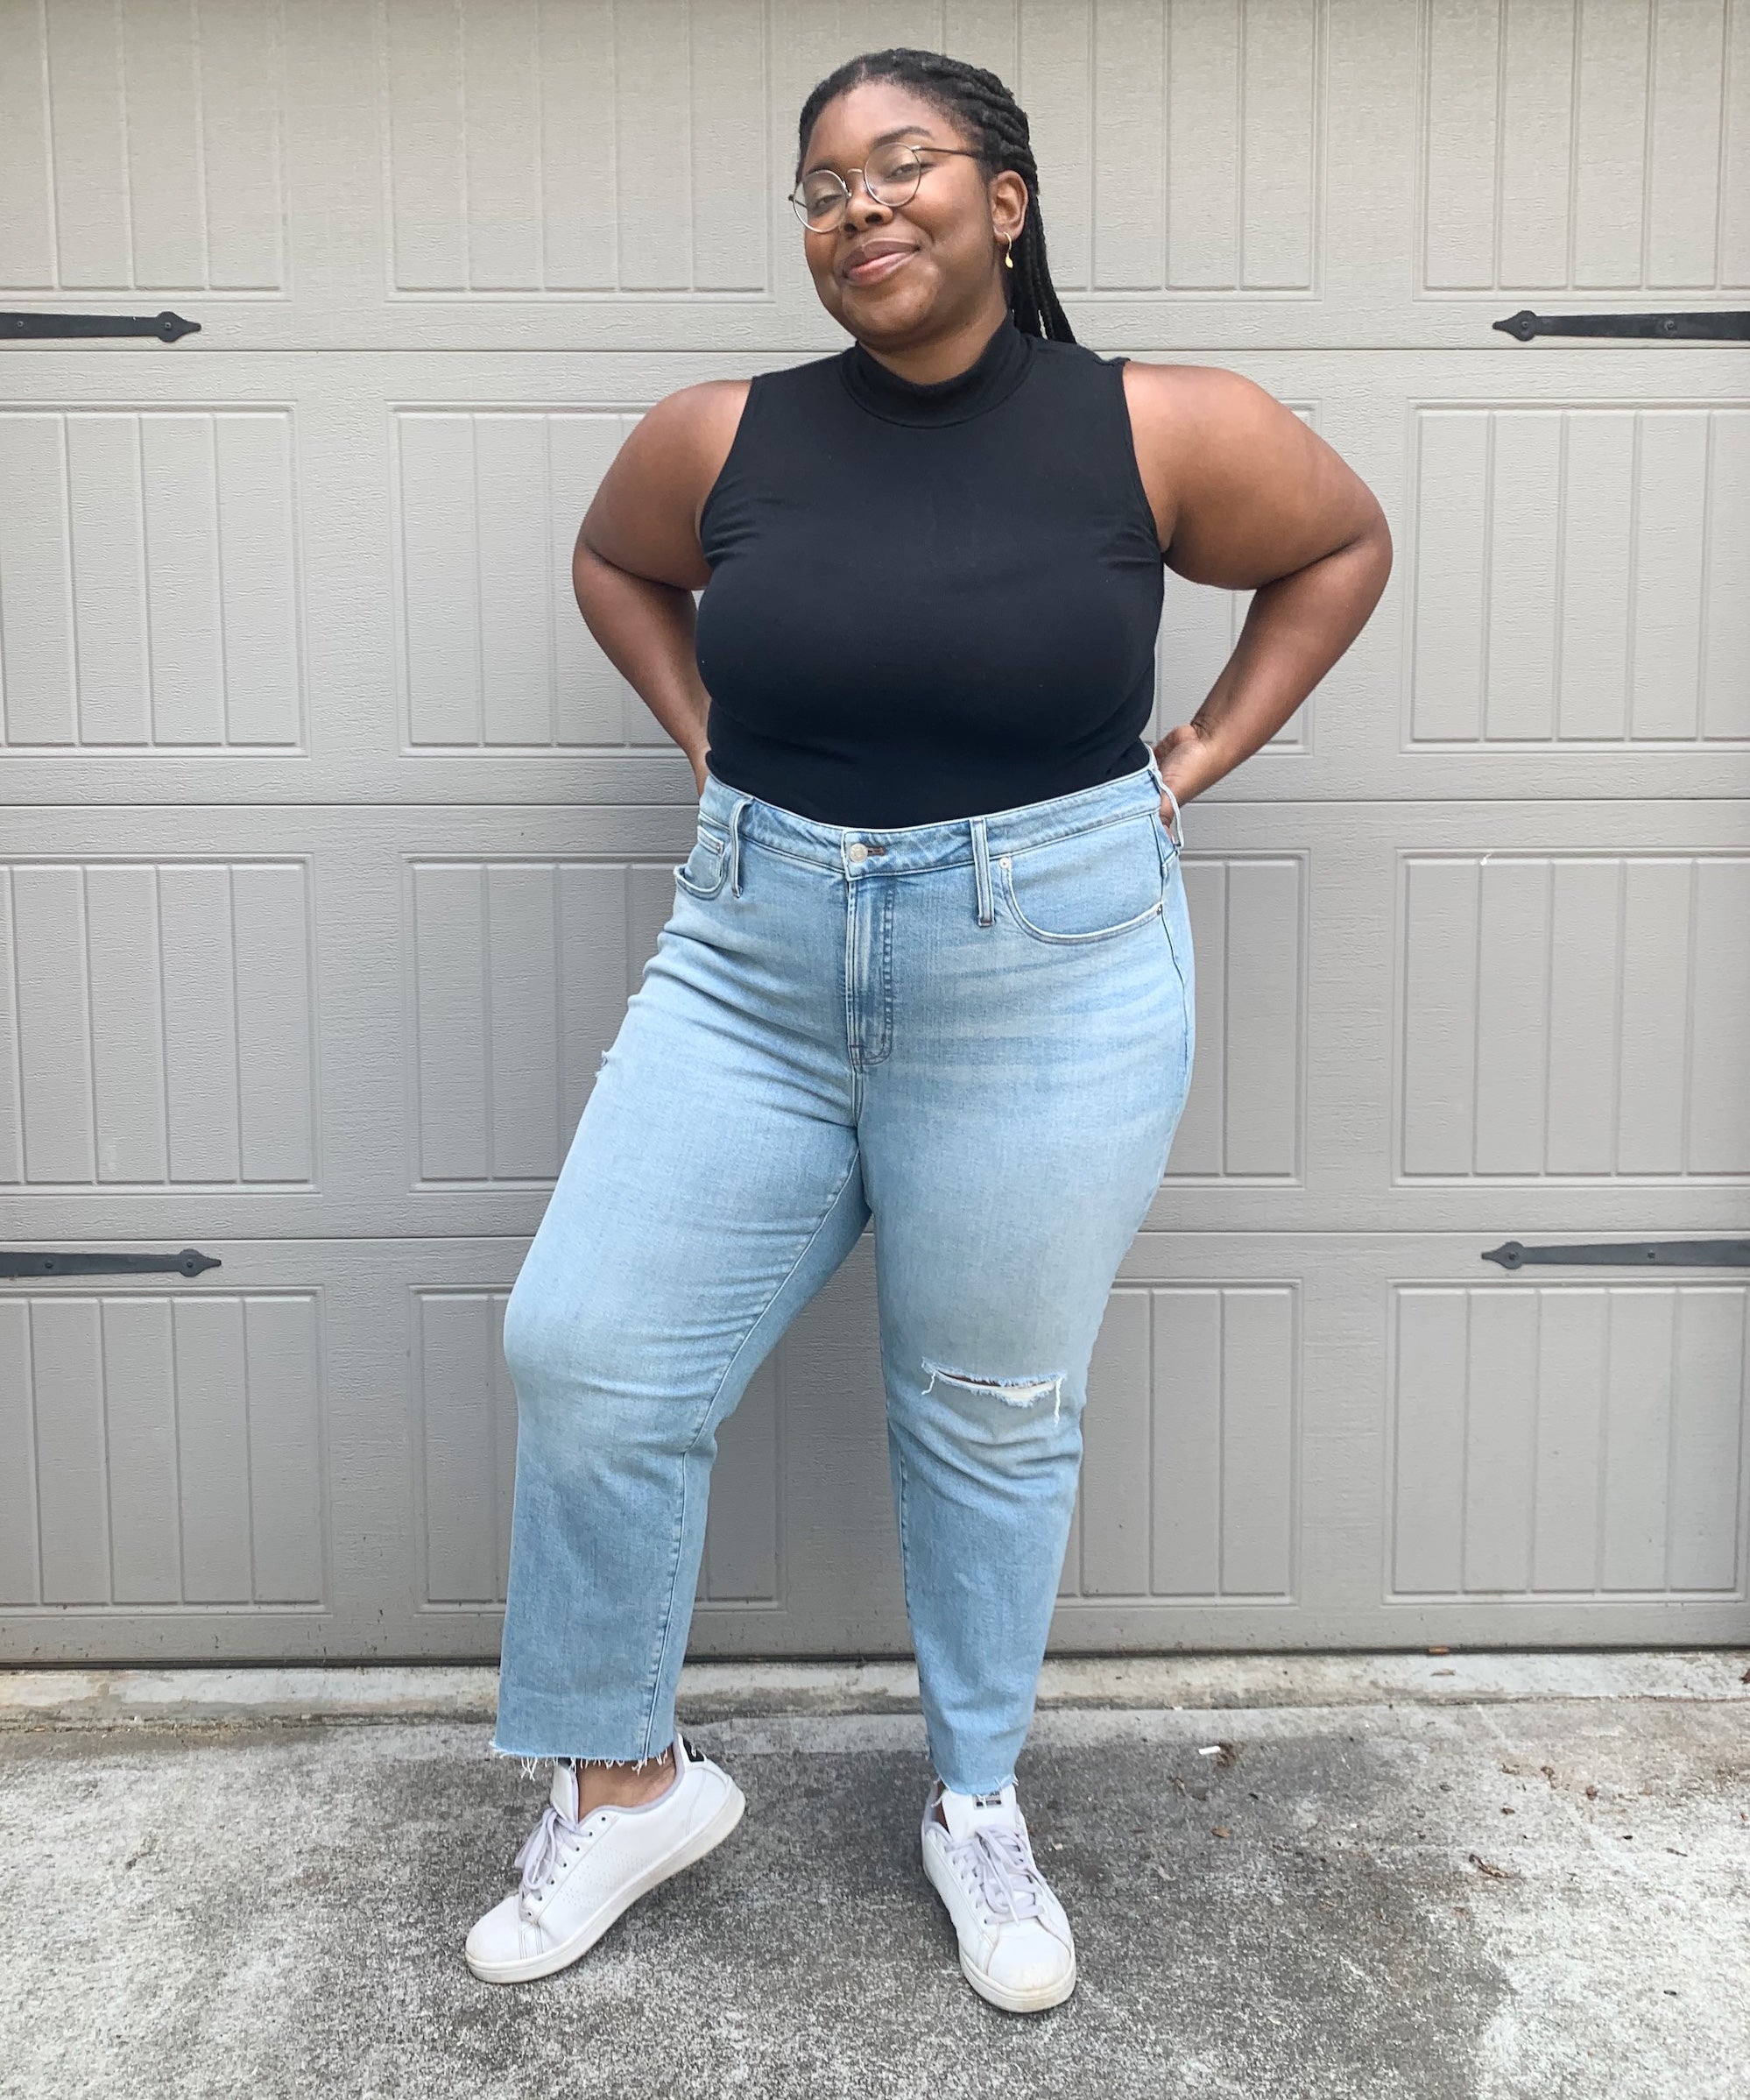 15 Best Plus Size Jeans That Are *Actually* Comfortable